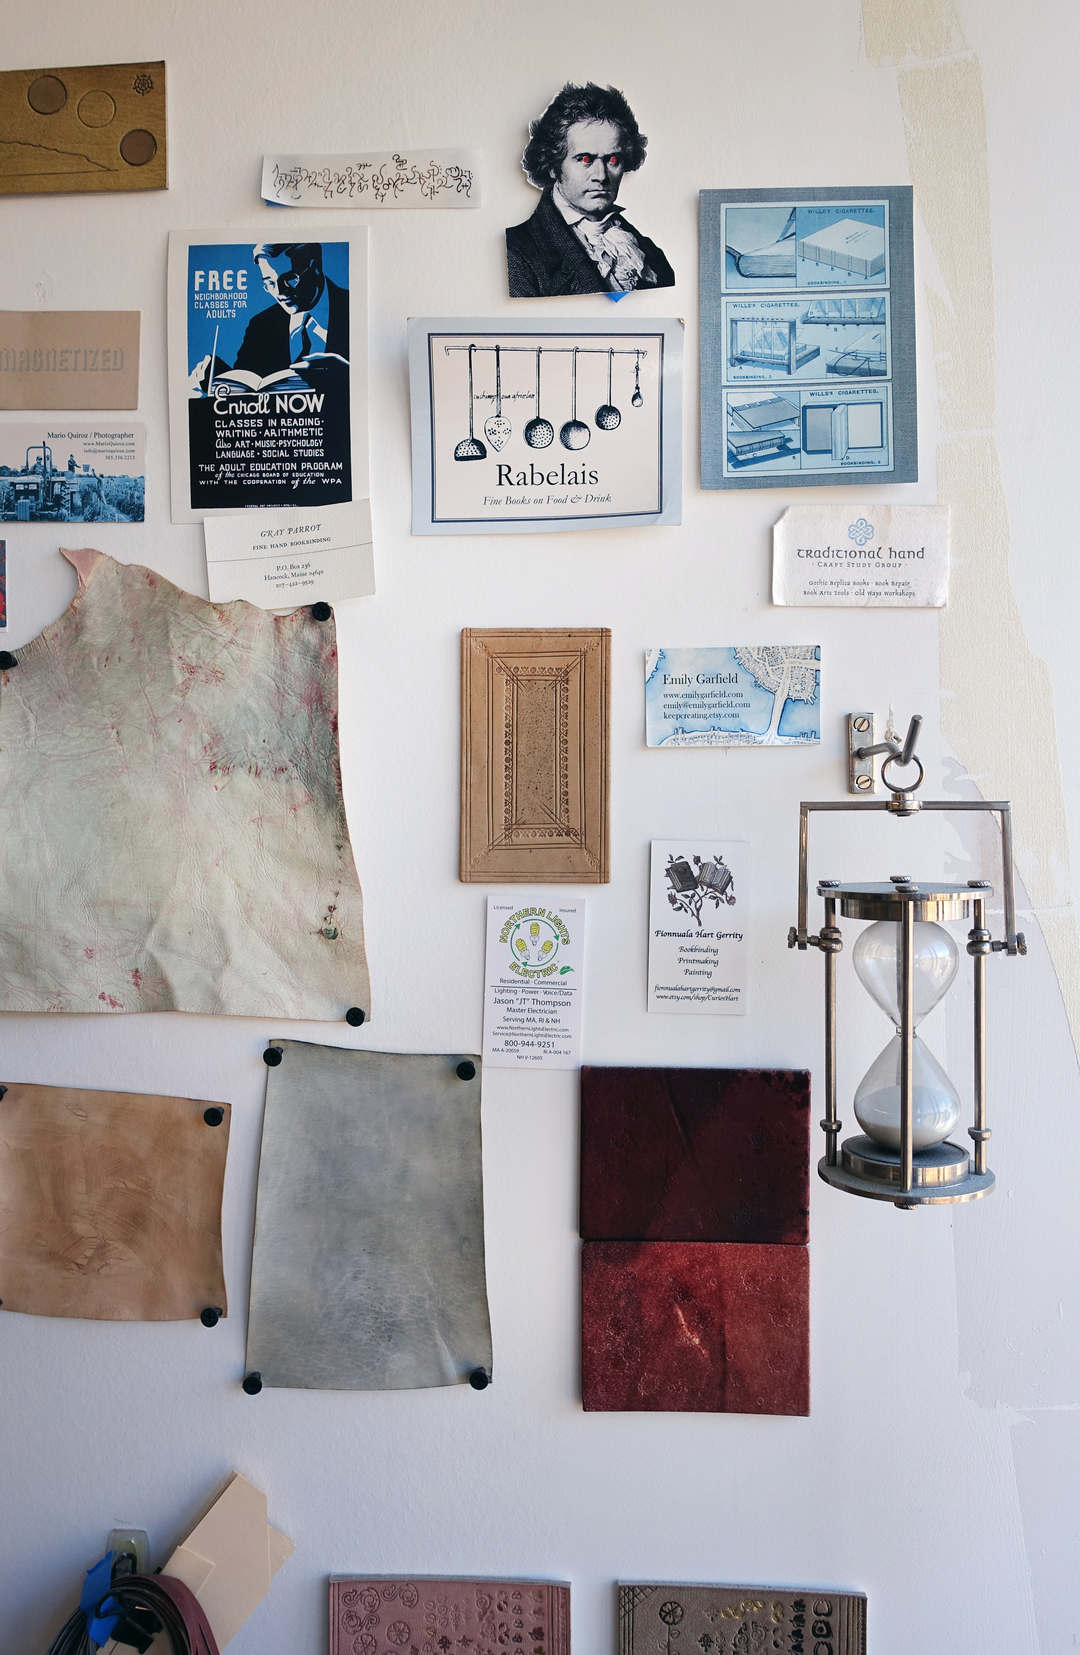 Colin’s wallspace, with various dye tests on leather